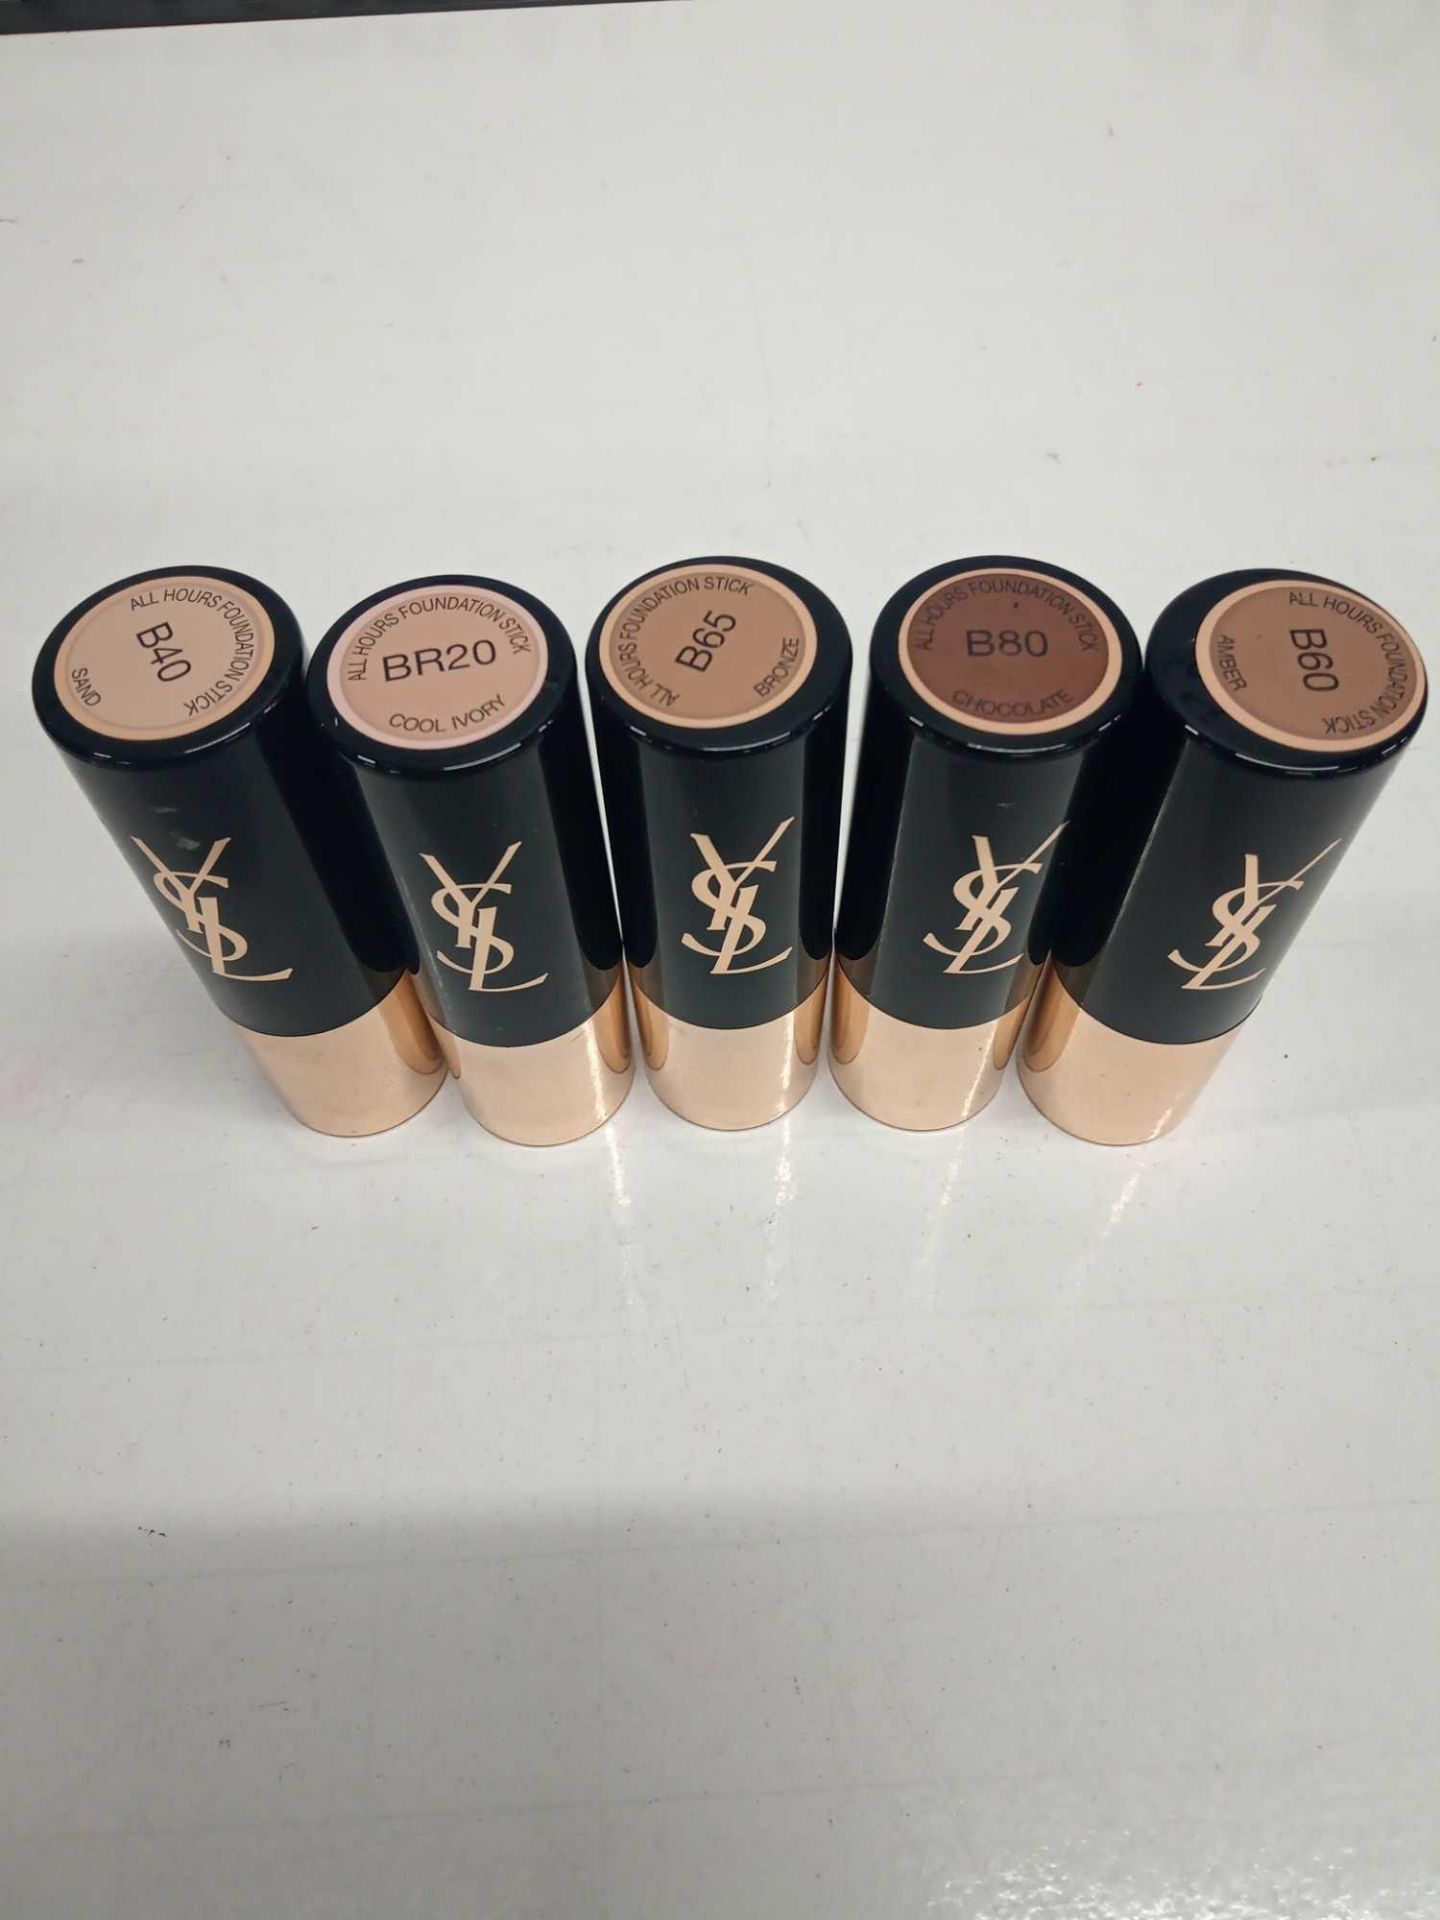 RRP £150 Gift Bag To Contain 5 Testers Of Ysl Fond De Taint Stick Foundation 9G Each In Assorted Sha - Image 2 of 3